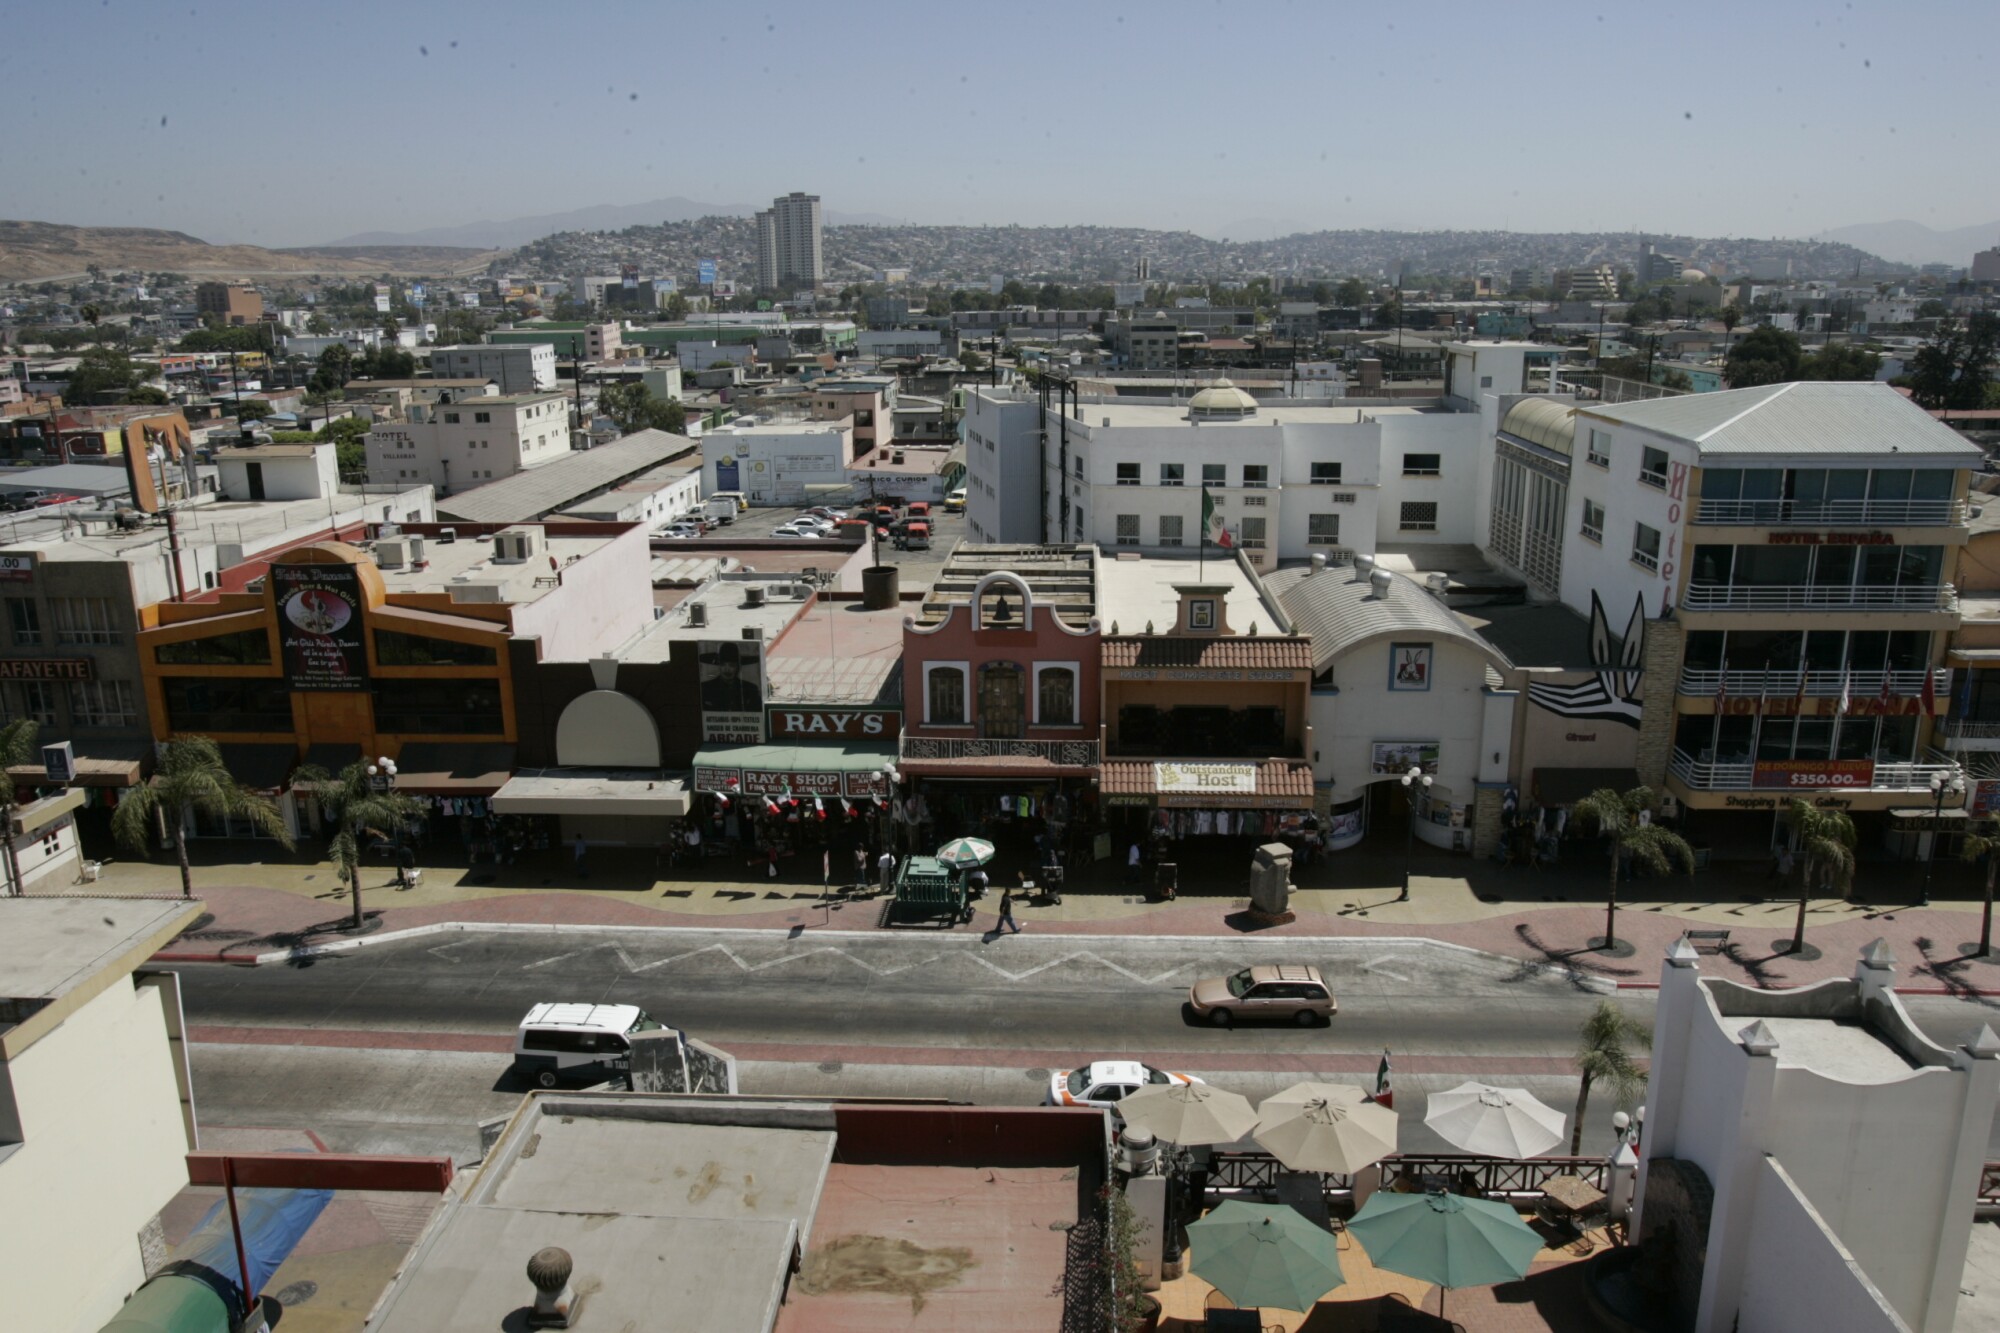 The view of Avenida Revolución from a rooftop amphitheater being renovated into a new music venue in 2010.